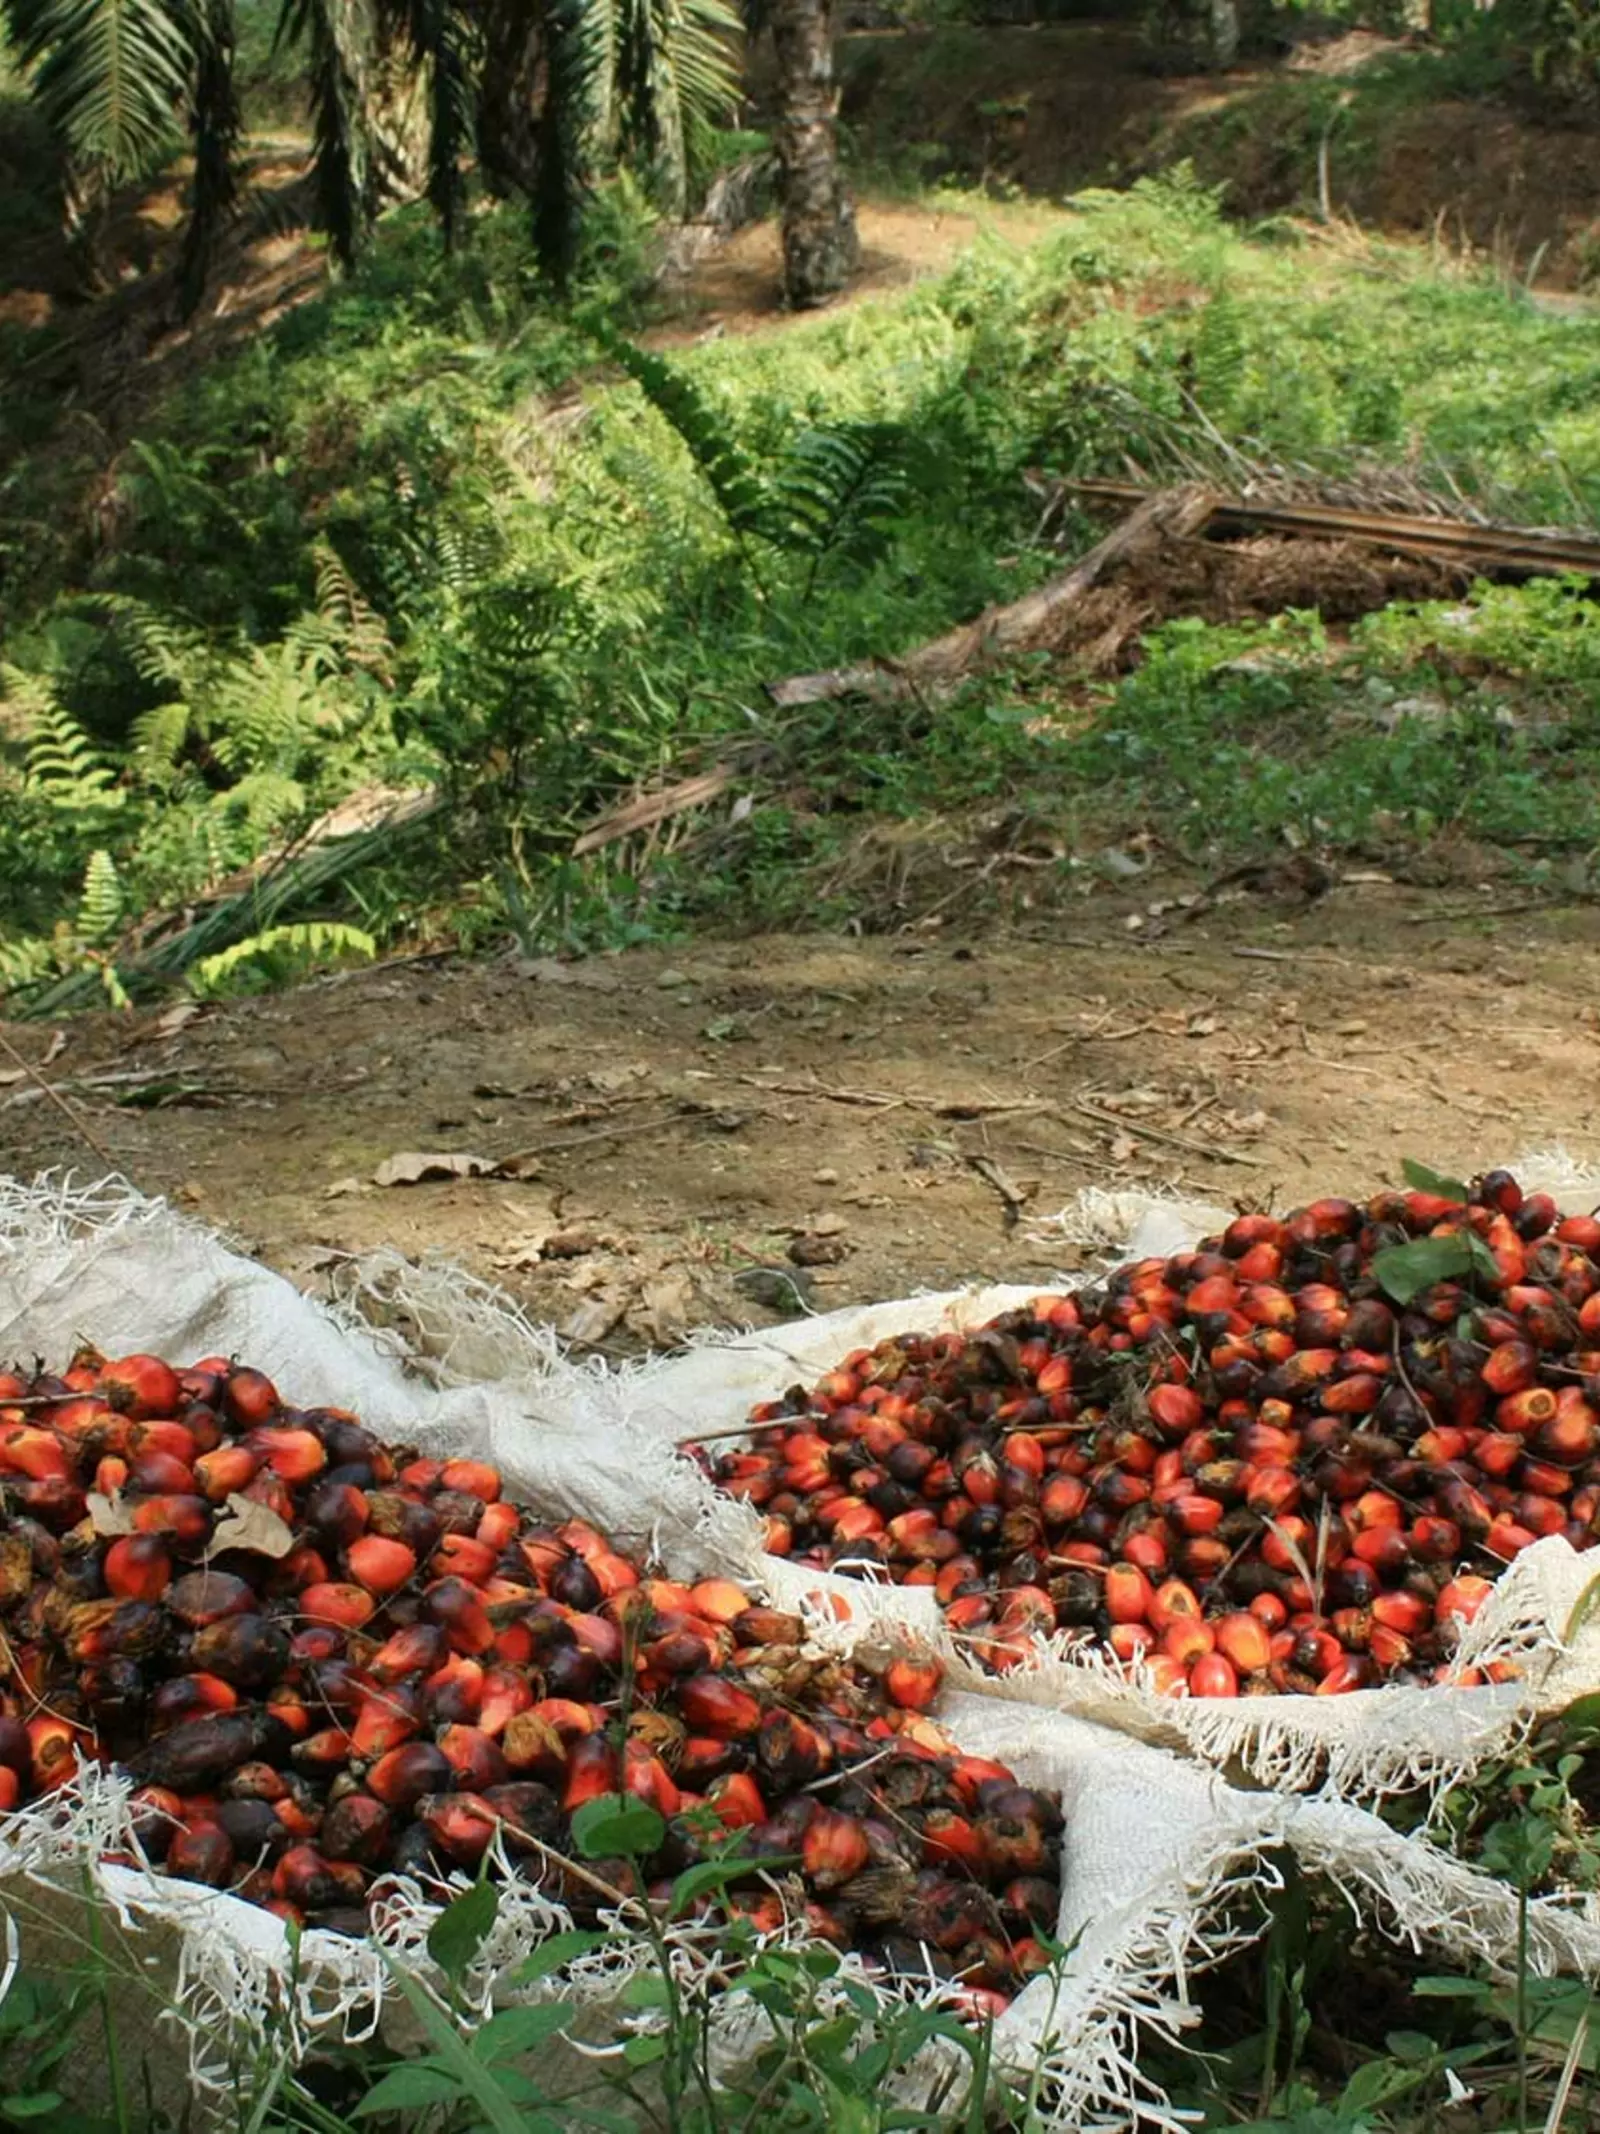 Fresh palm oil fruit in piles in Indonesia